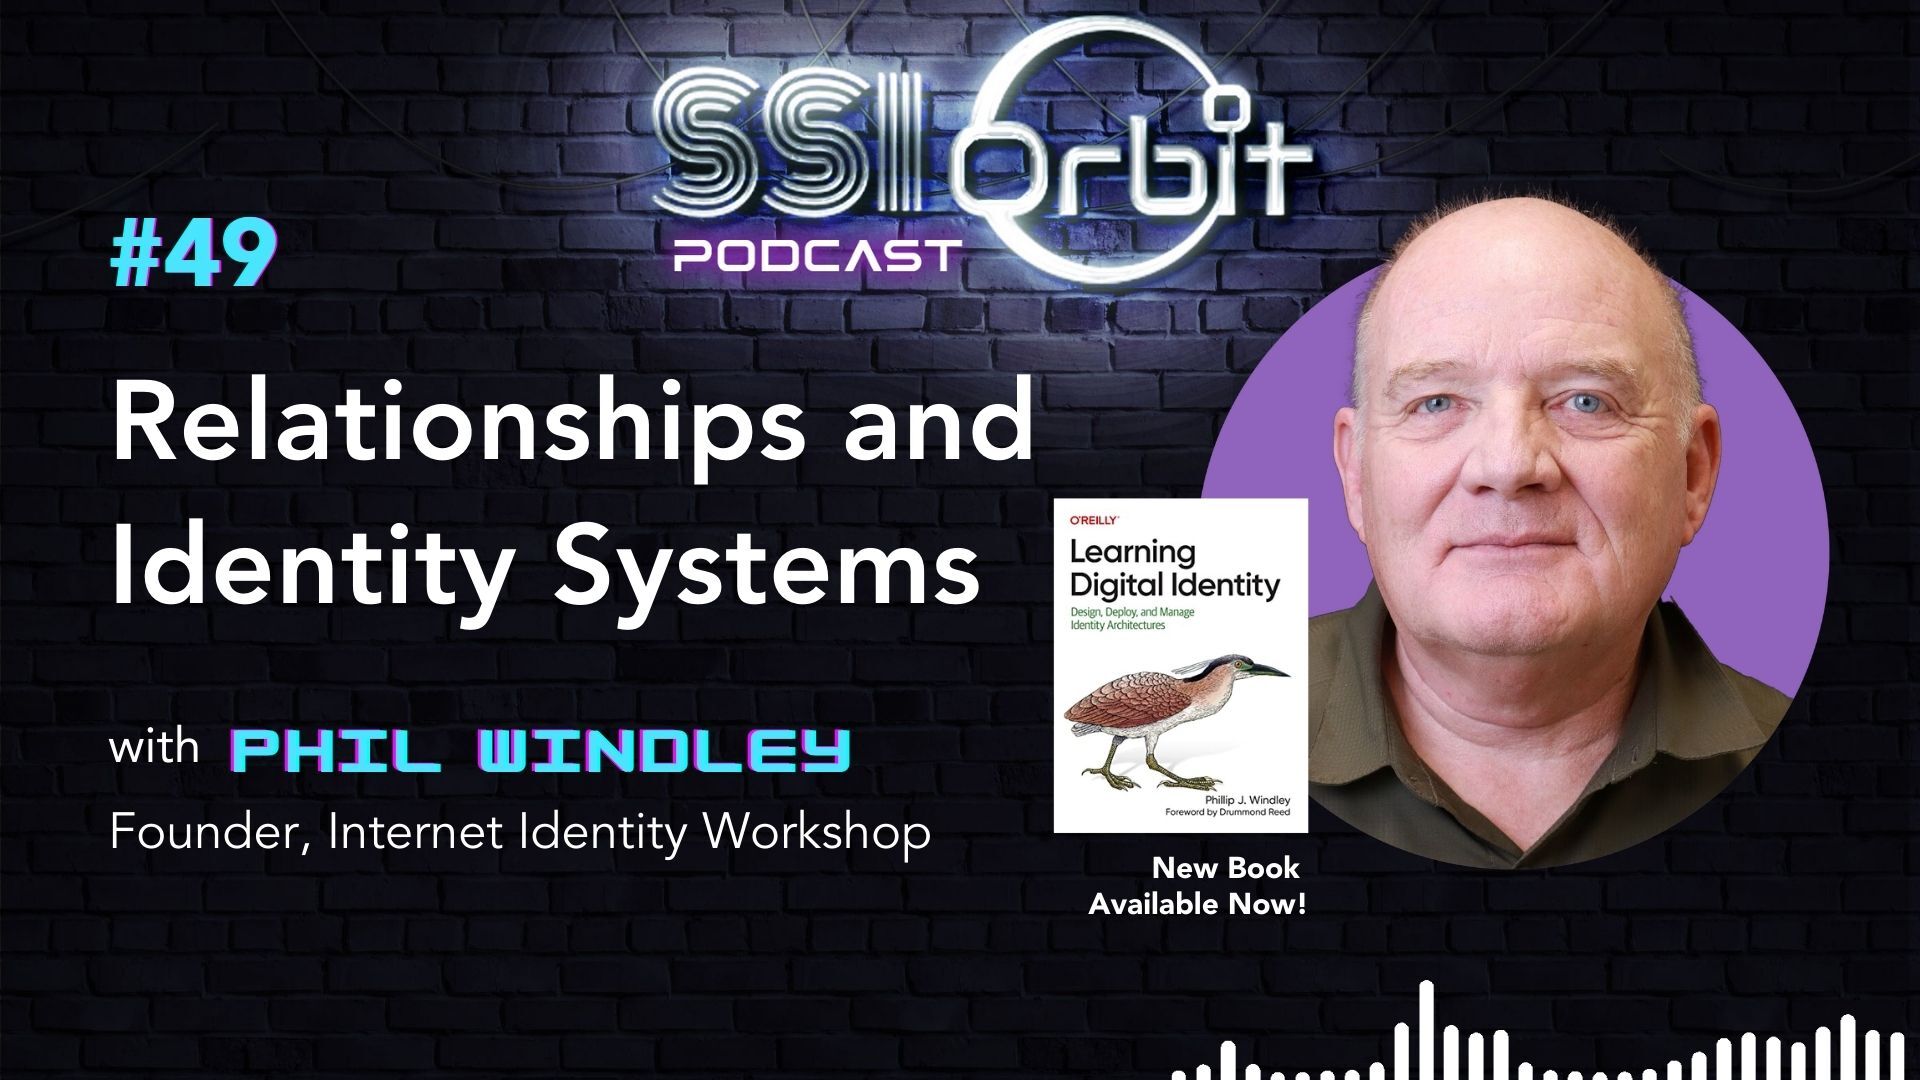 Relationships and Identity Systems (with Phil Windley)